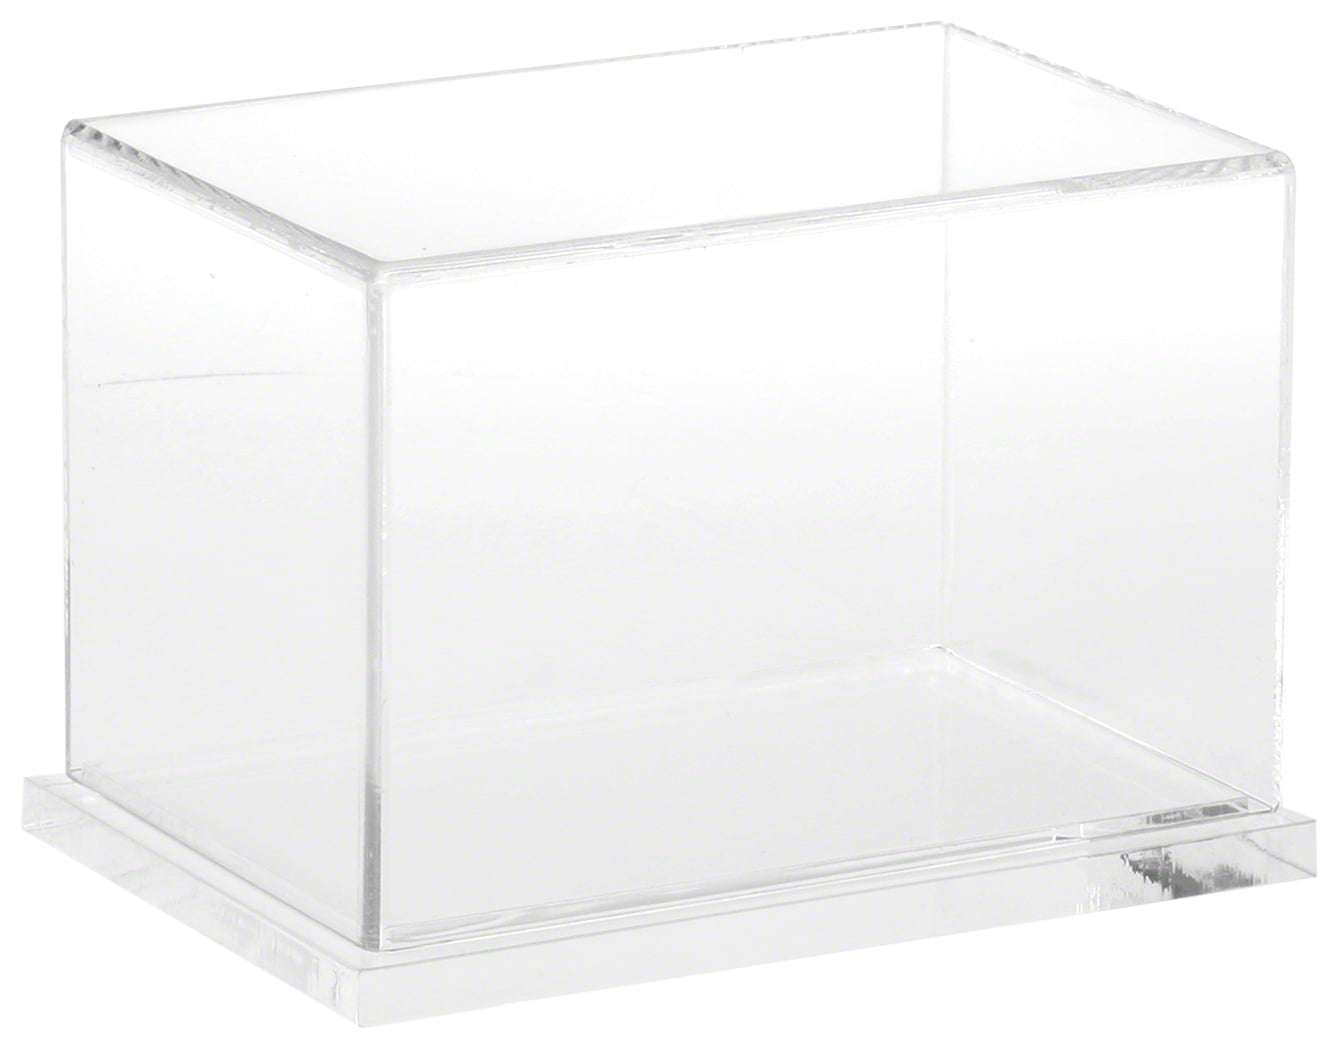 Large Acrylic Display Box Collectible Display Case Clear Store Display 15"x15x15 